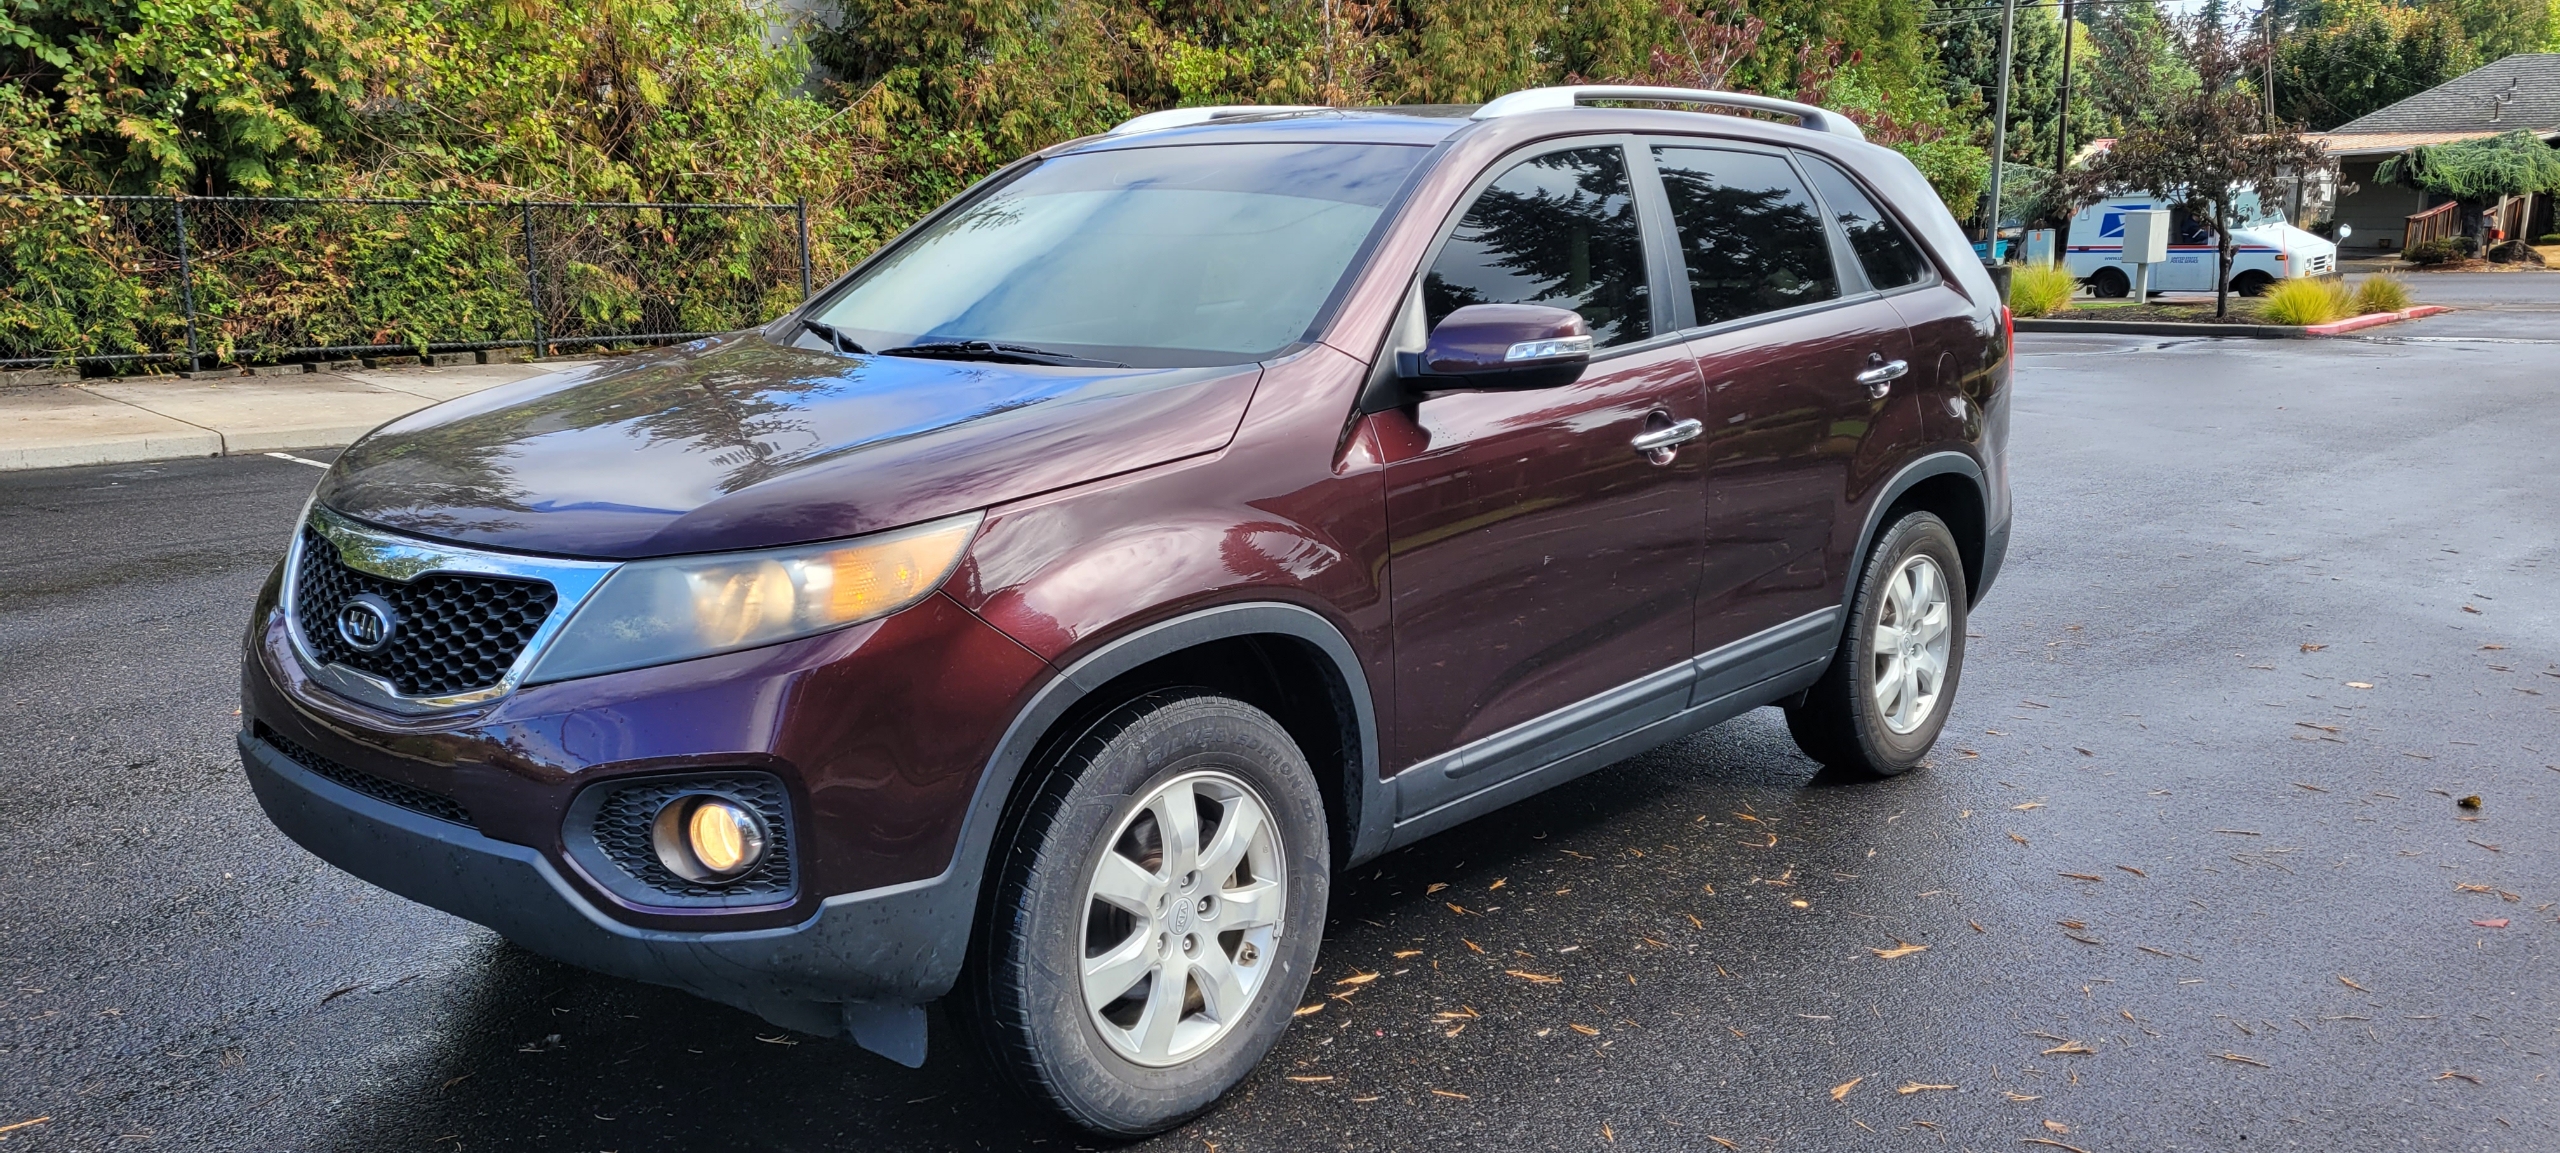 SUPER FUN~4 CYLINDER ~ 2011 KIA SORENTO LX SUV~ WE LOVE THESE...AND IT'S  PURPLE! CALL NOW! - Top Auto Brokers